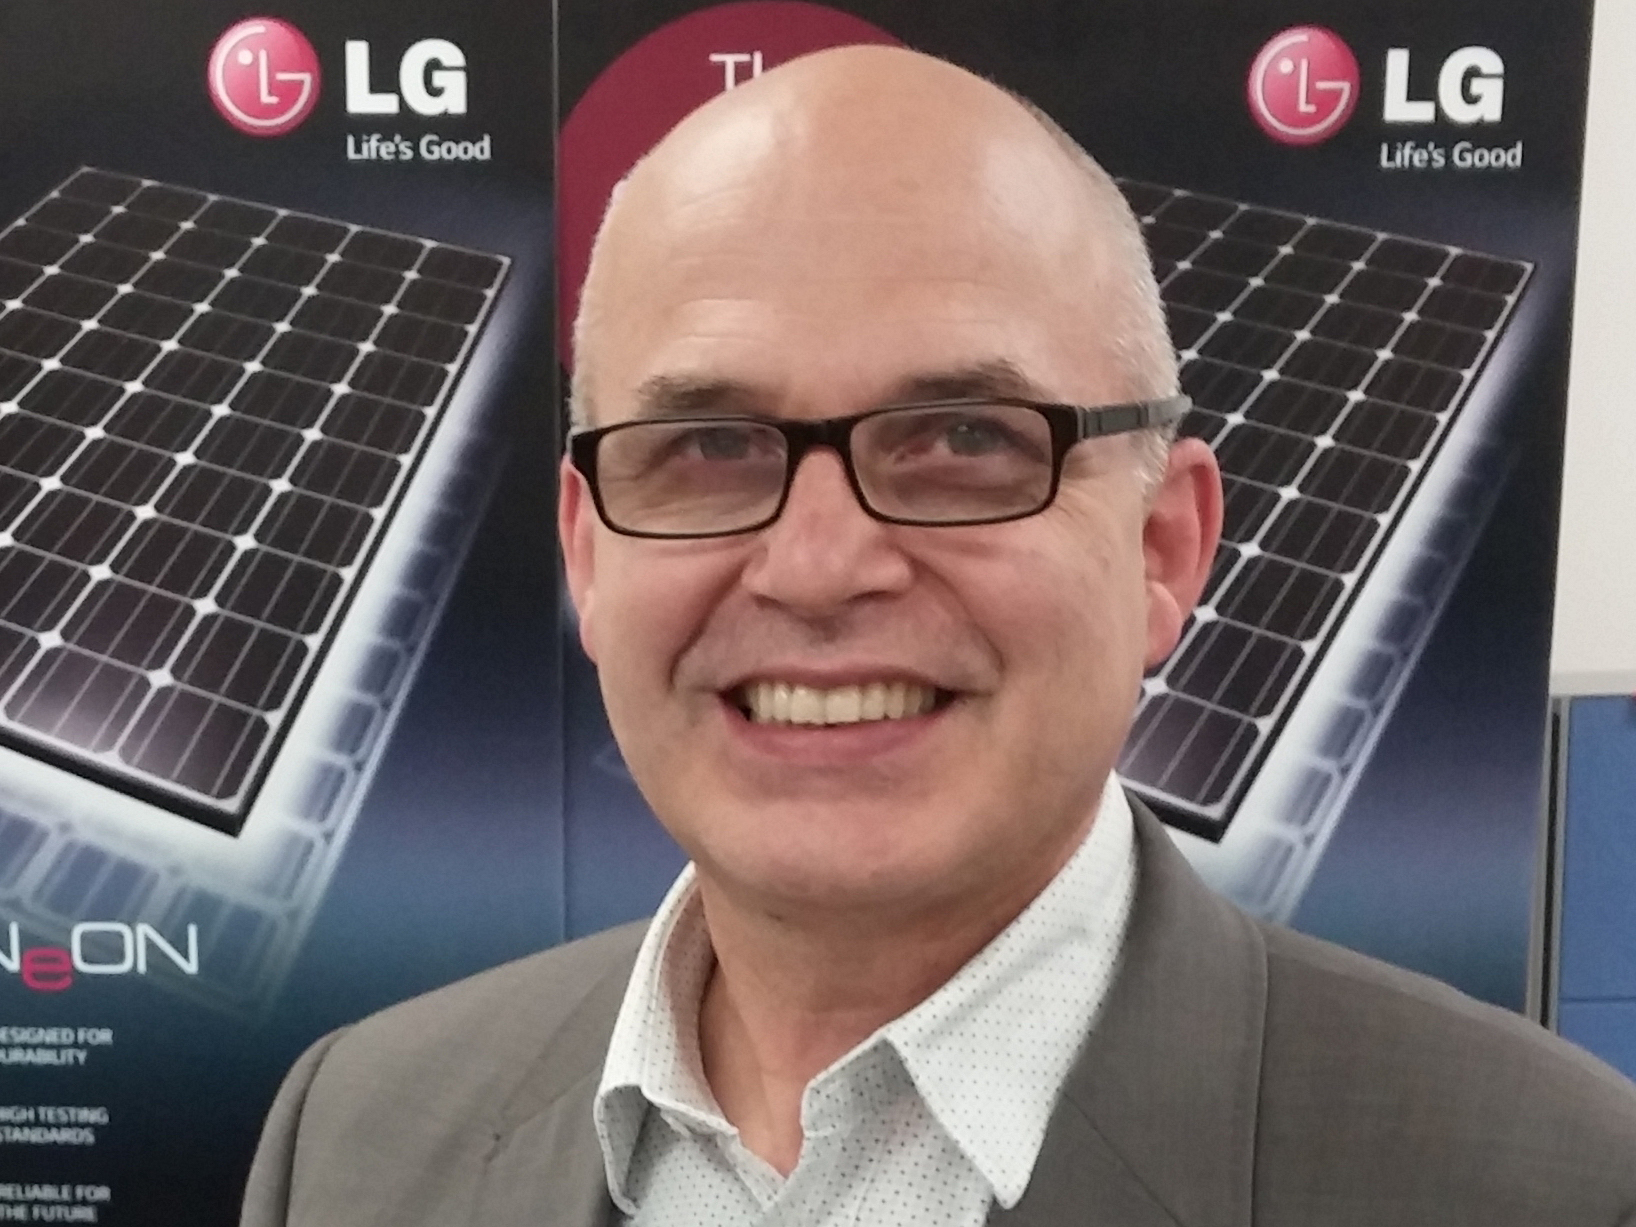 According to LG general manager Solar &amp; Energy Markus Lambert, the time is now to think and design for a sun-powered future. Image: Supplied.
